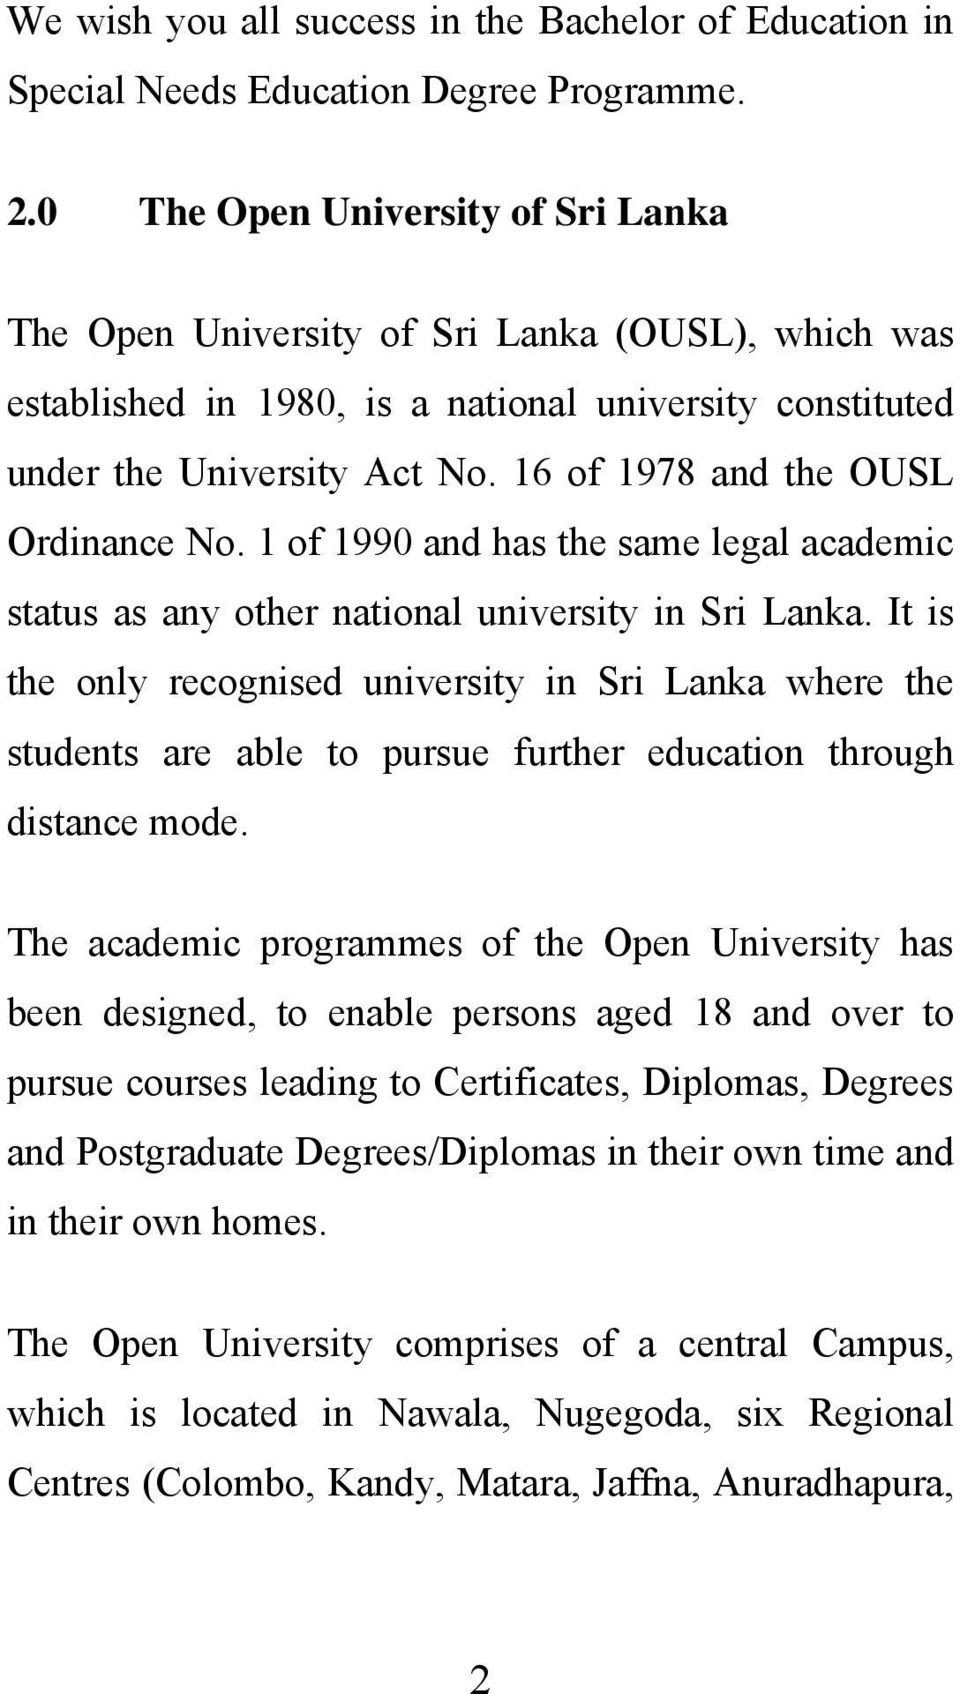 16 of 1978 and the OUSL Ordinance No. 1 of 1990 and has the same legal academic status as any other national university in Sri Lanka.